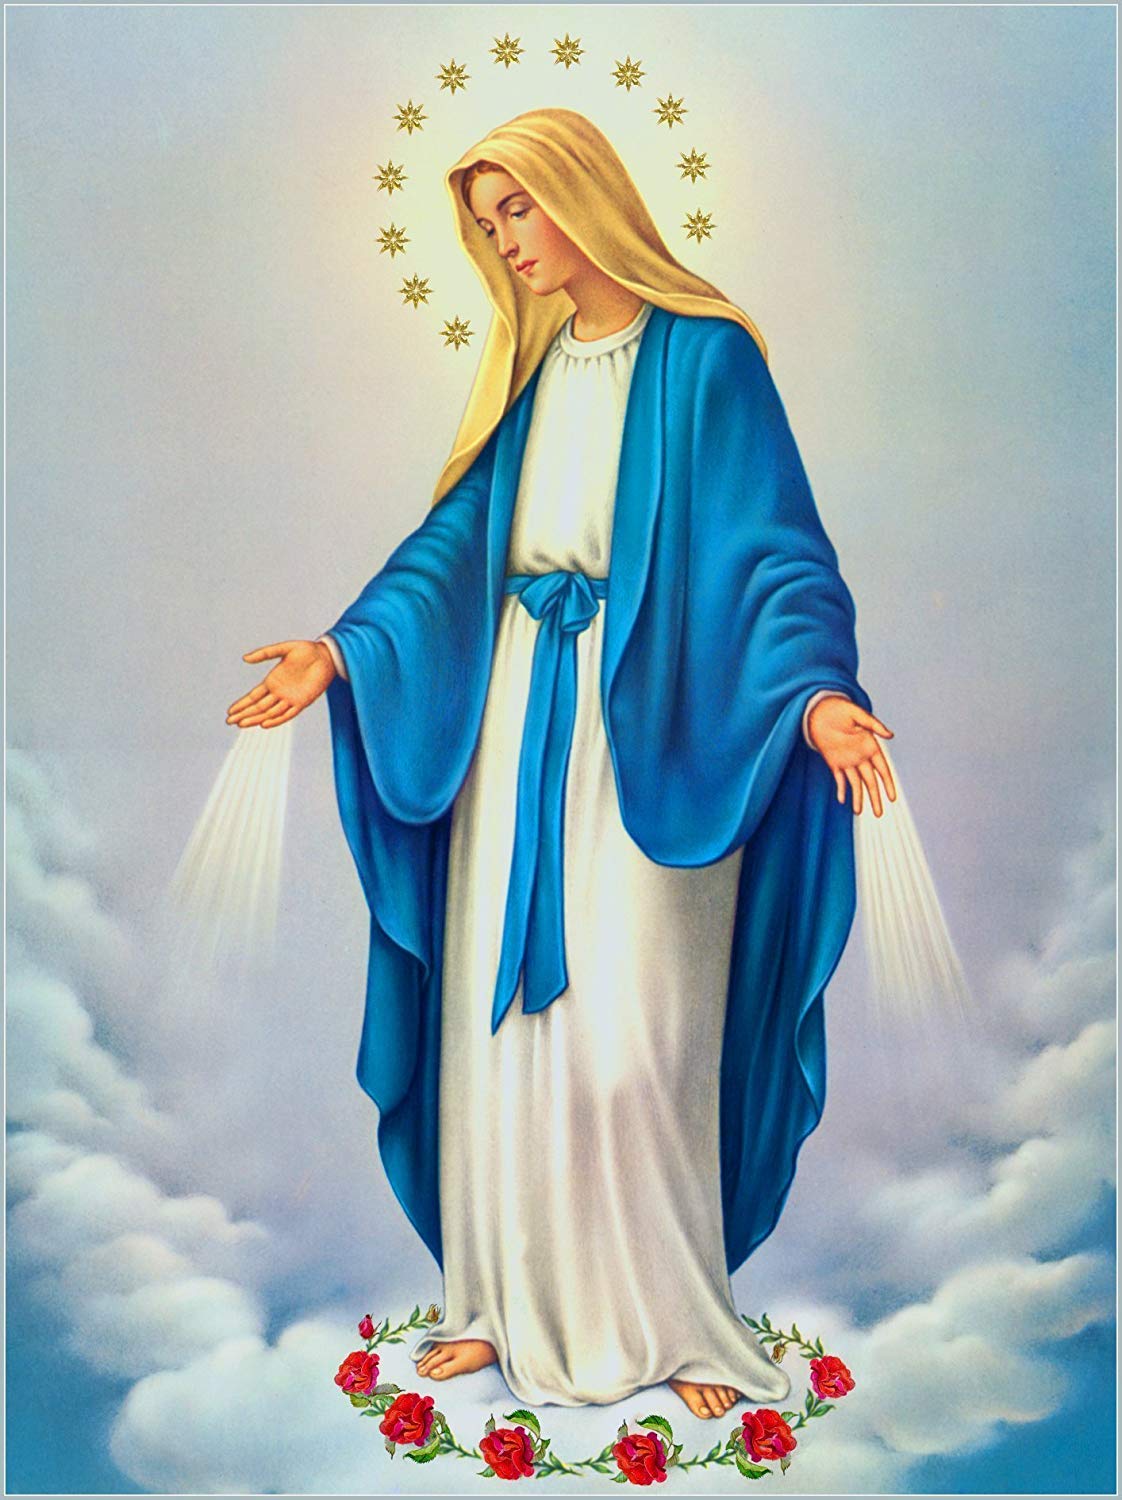 Free download Amazoncom Immaculate Conception POSTER A2 Pictures ...